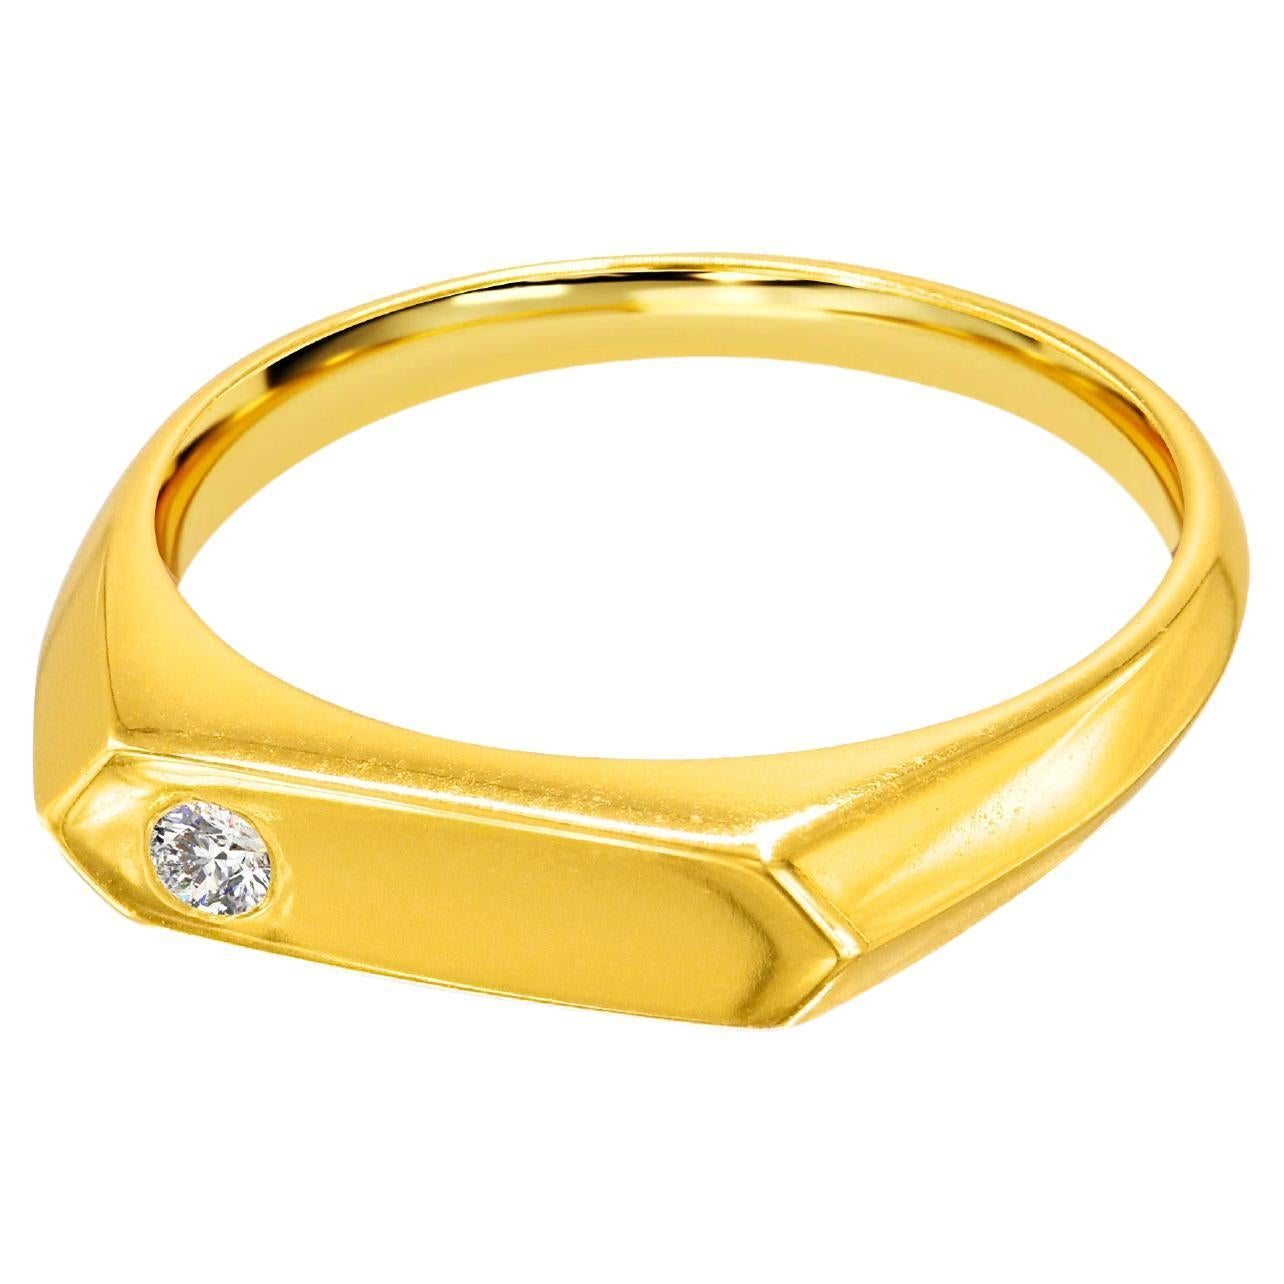 For Sale:  18K Gold filled Signet Bar ring with 0.04 Carat Natural Diamond